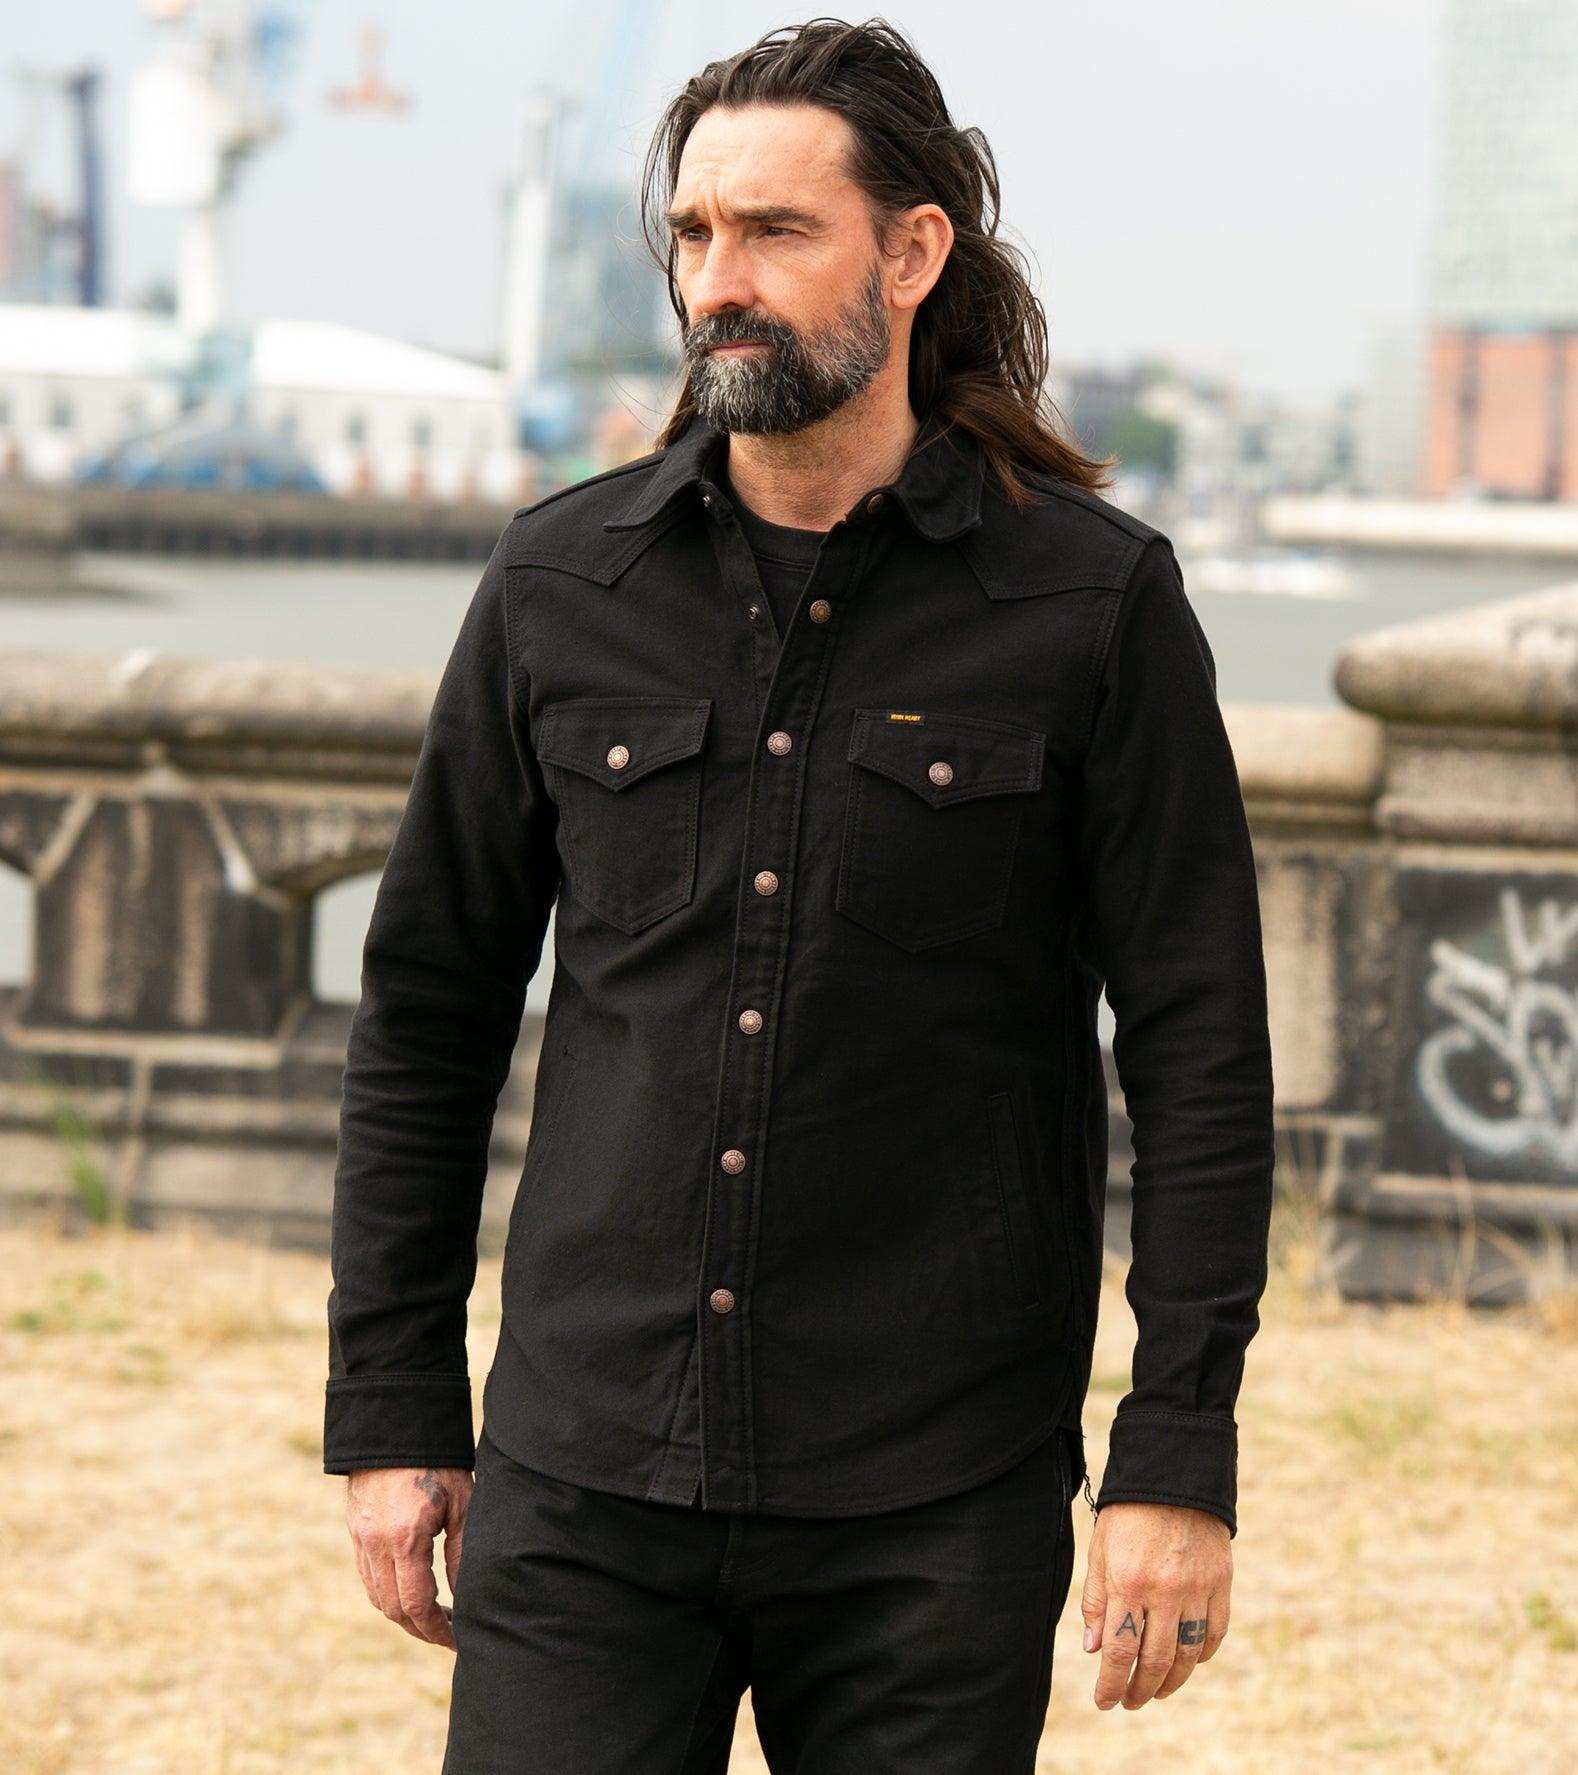 Image showing the IHSH-331-BLK - 12oz Moleskin CPO Shirt - Black which is a Shirts described by the following info IHSALE_M23, Iron Heart, Released, Shirts, Tops and sold on the IRON HEART GERMANY online store